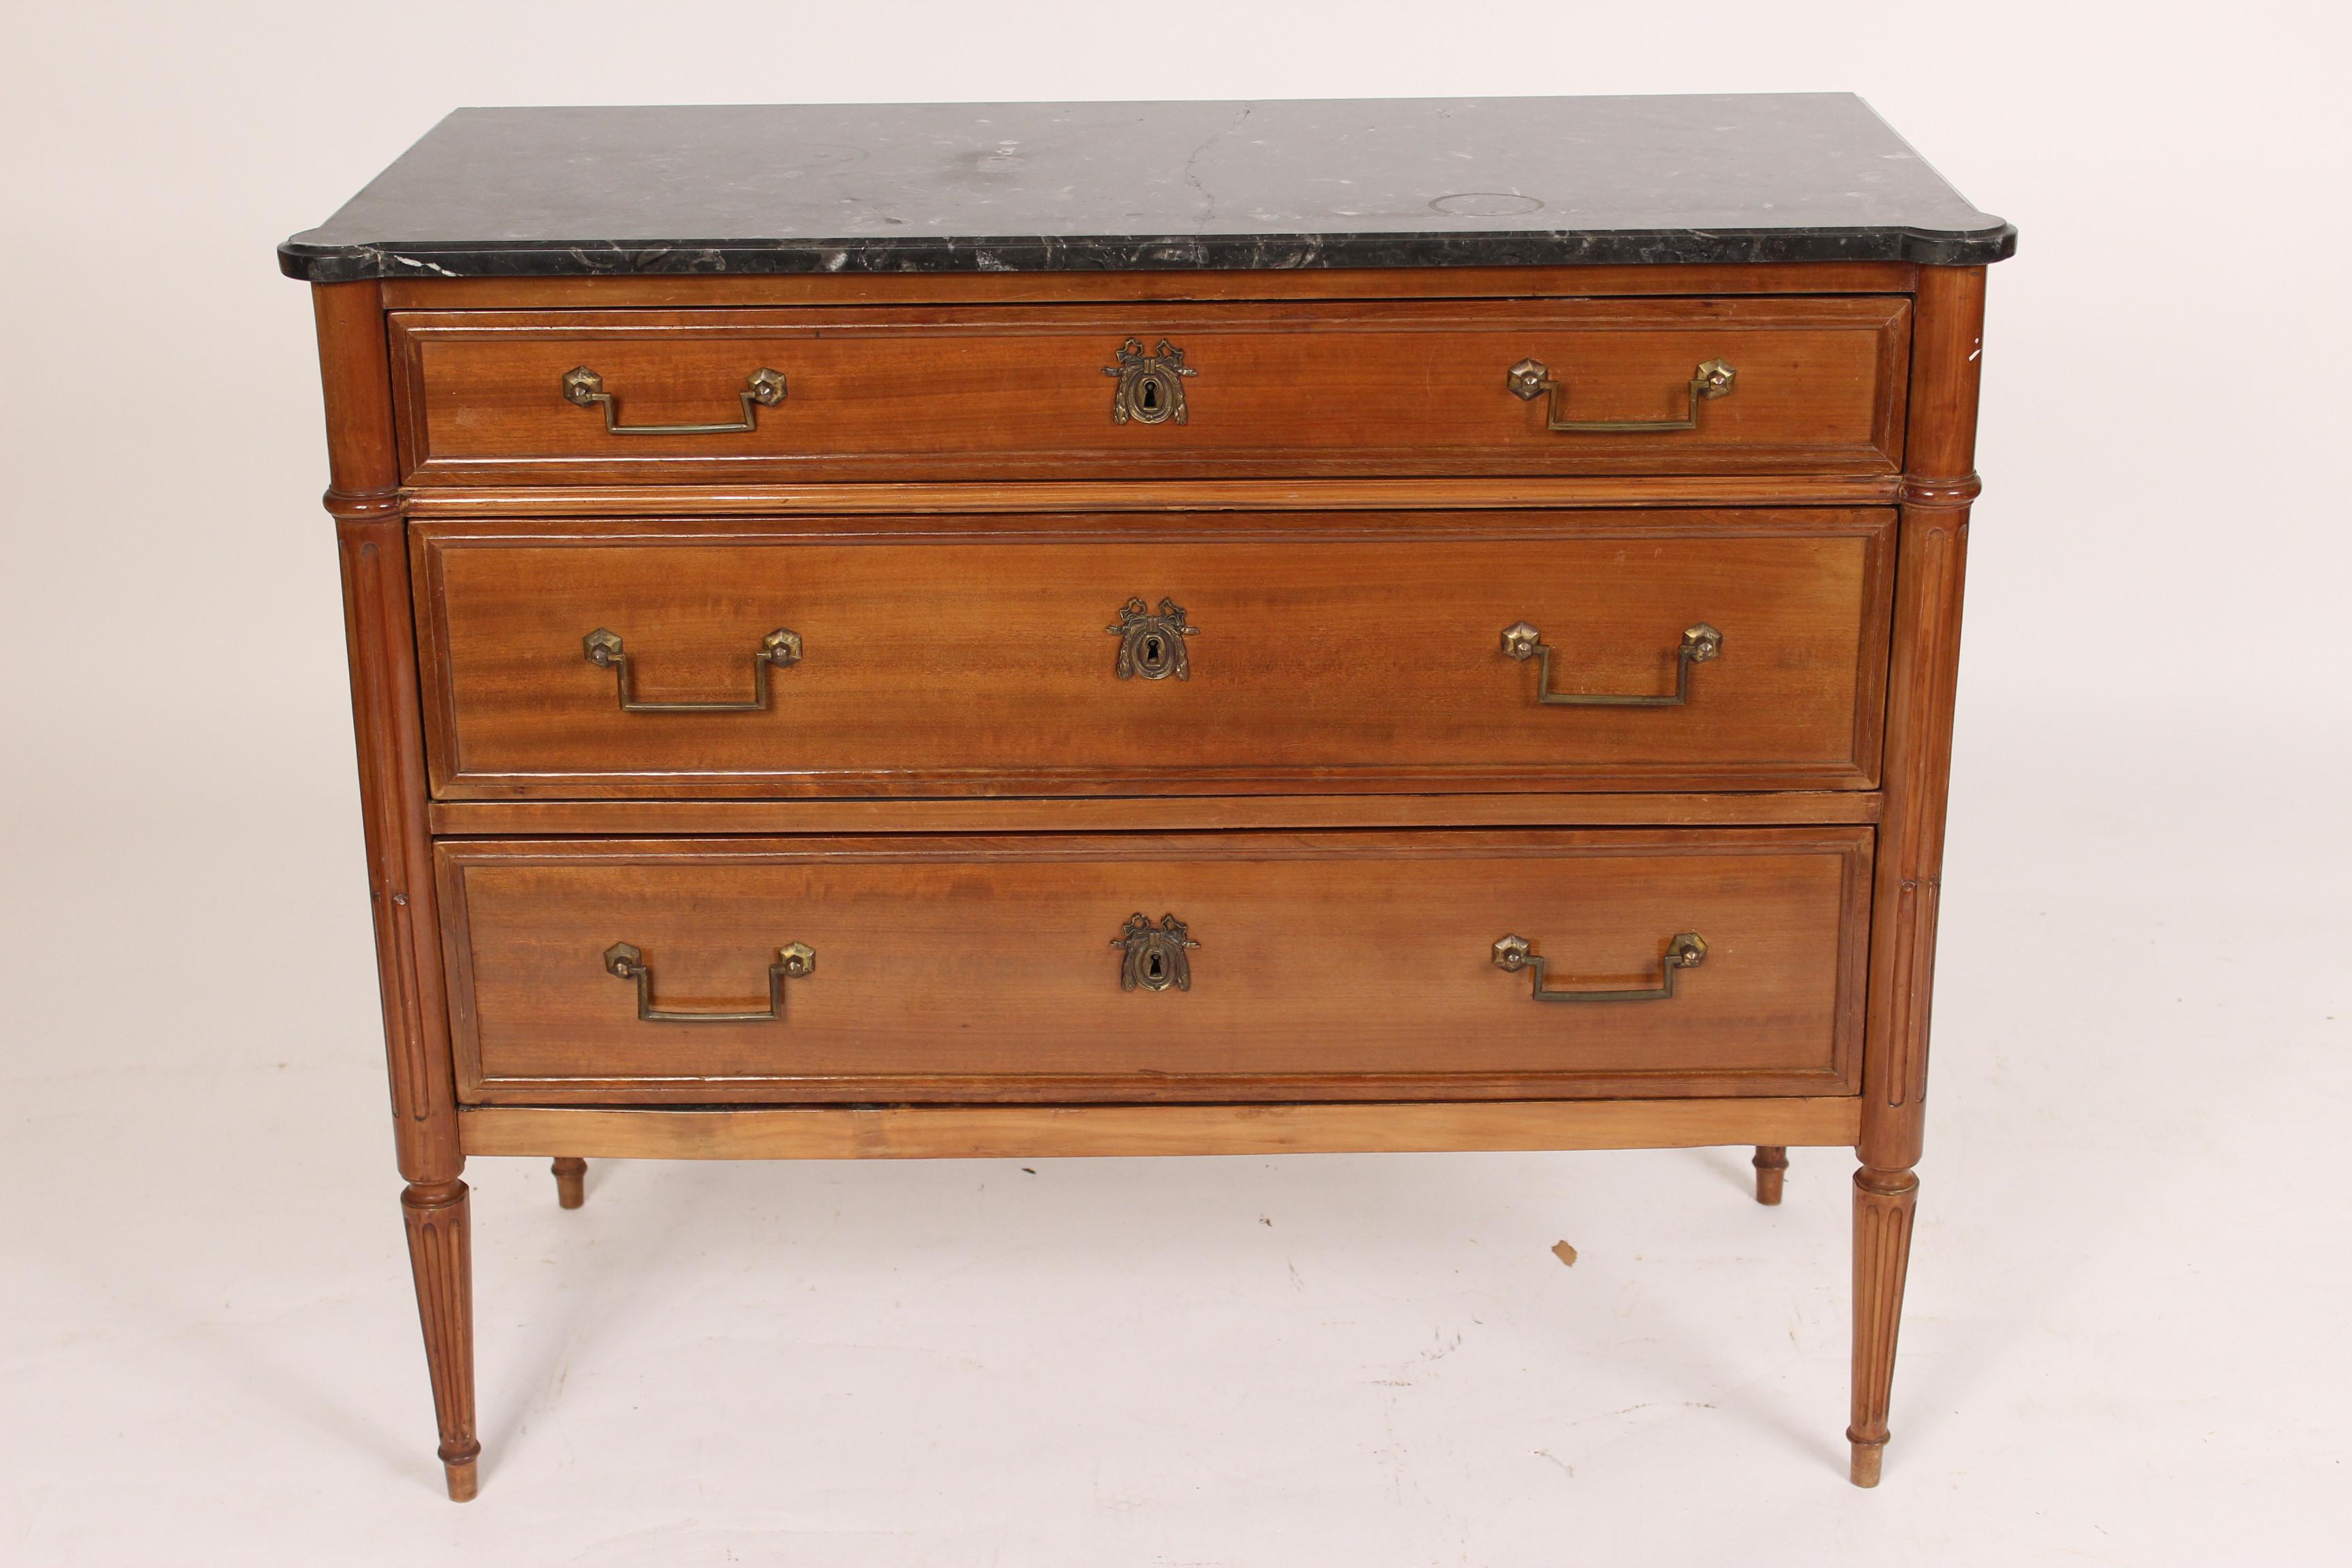 Antique Louis XVI style mahogany chest of drawers with a marble top, circa late 19th century.